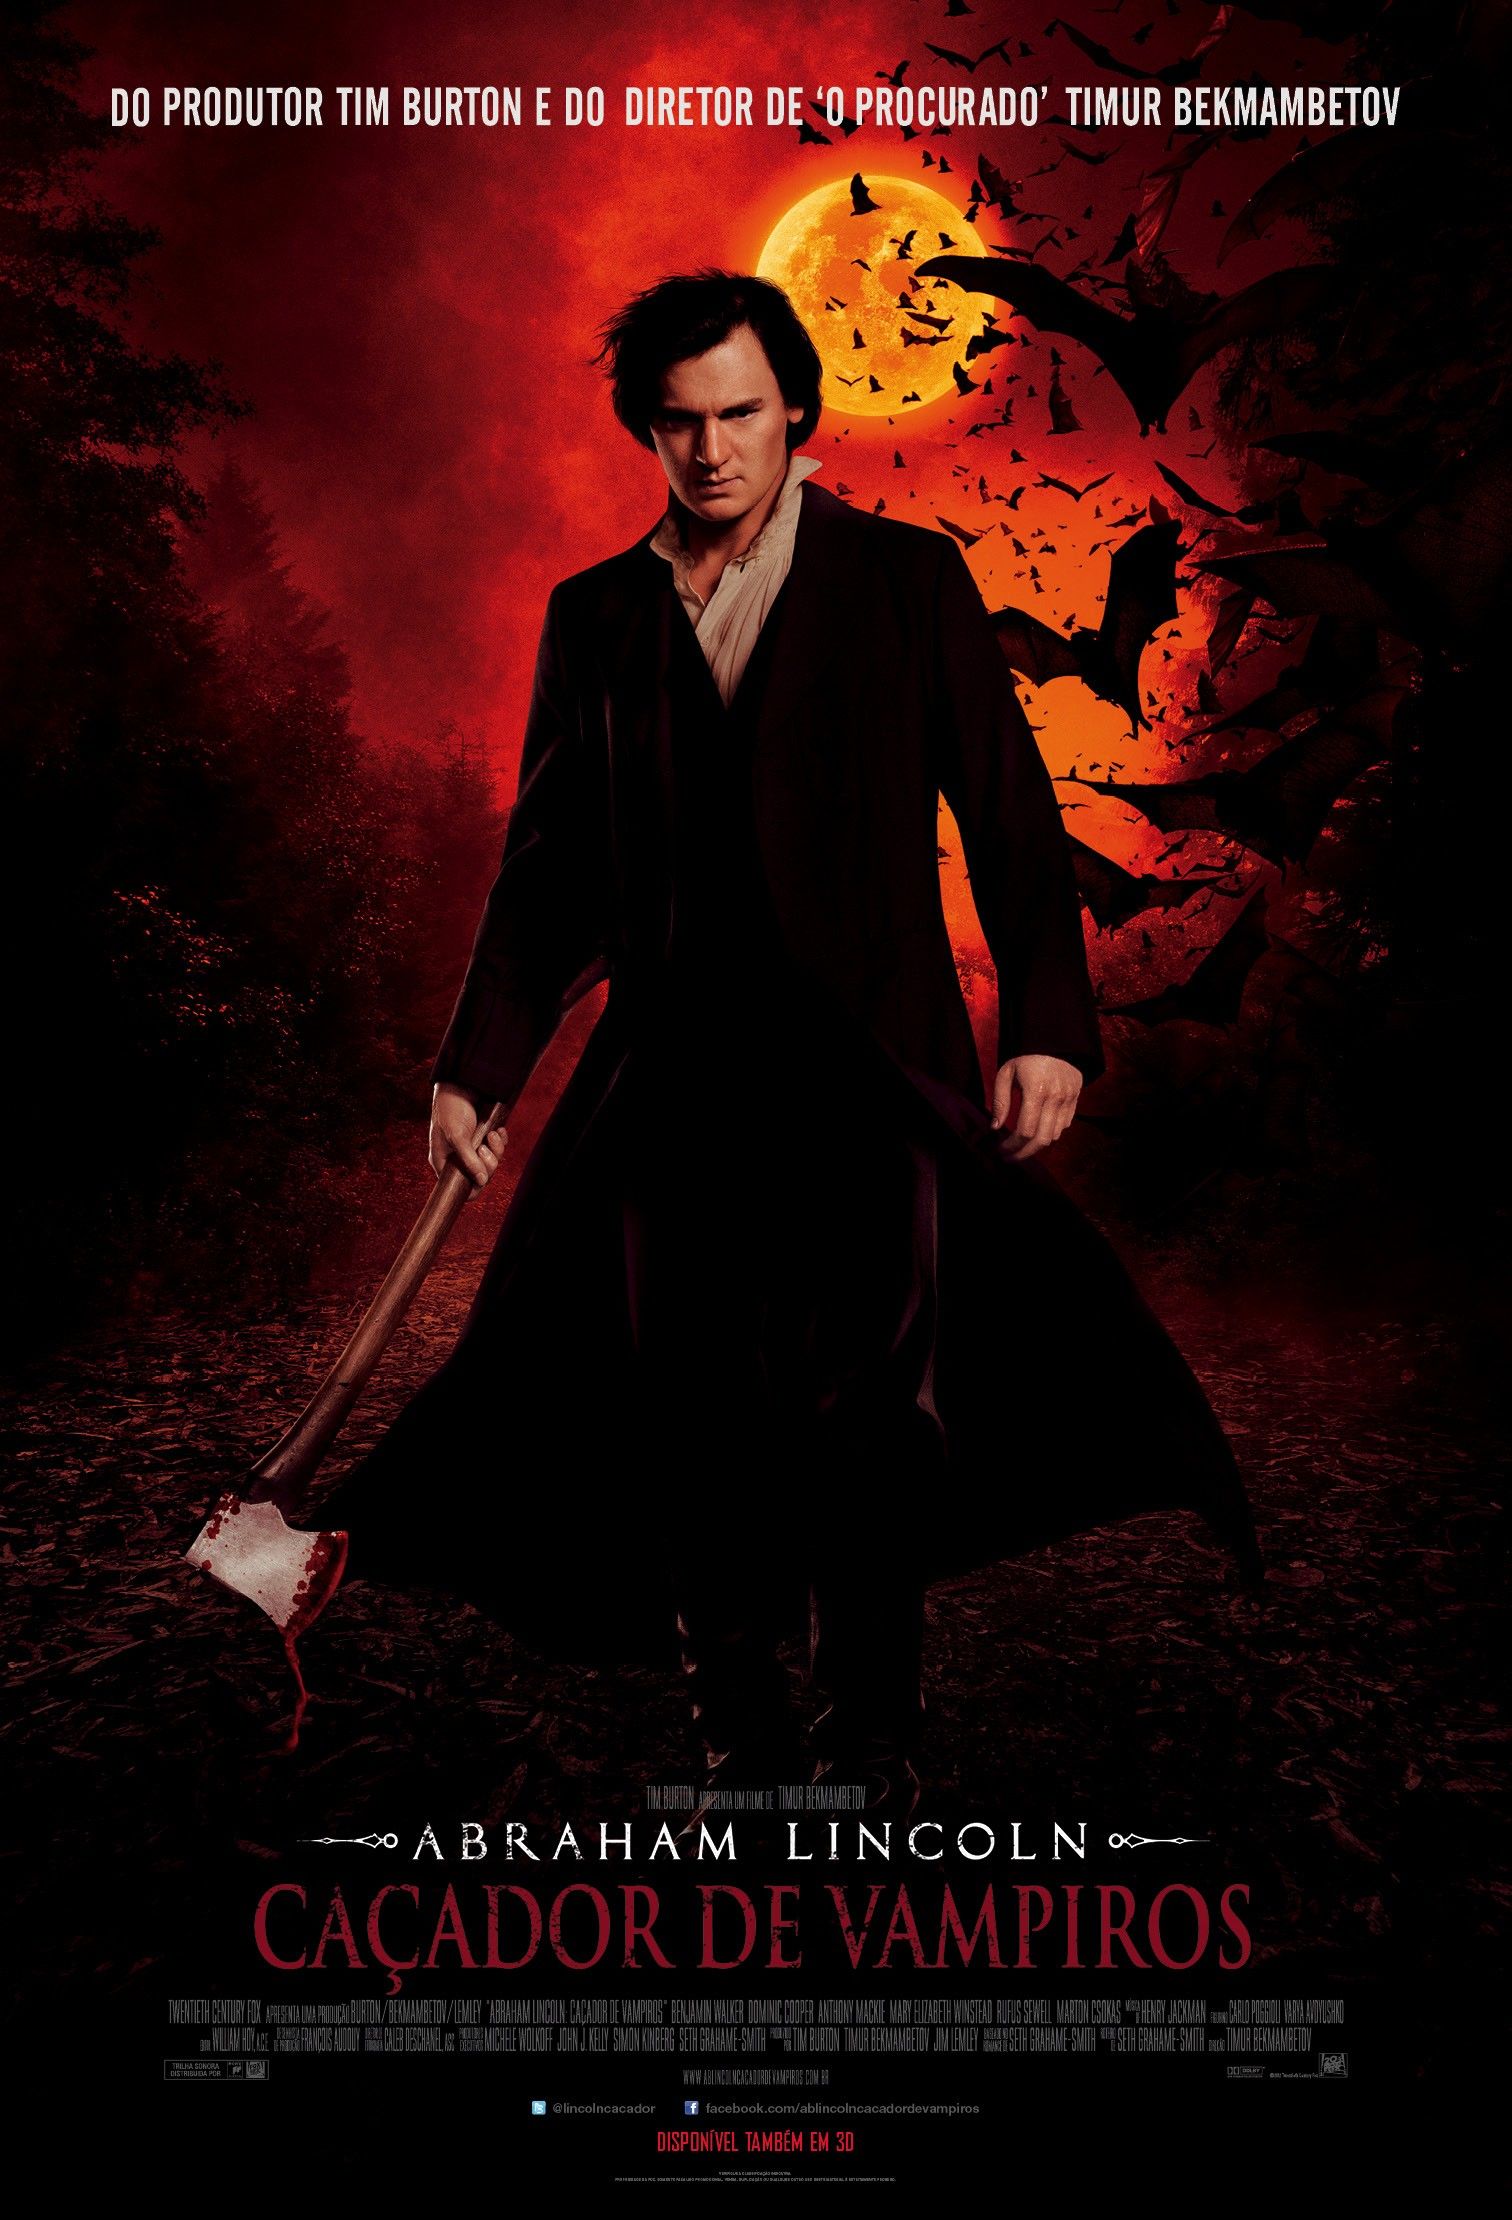 https://www.kinogallery.com/images/lincoln-vampire/kinogallery.com-lincoln-vampire-32352.jpg